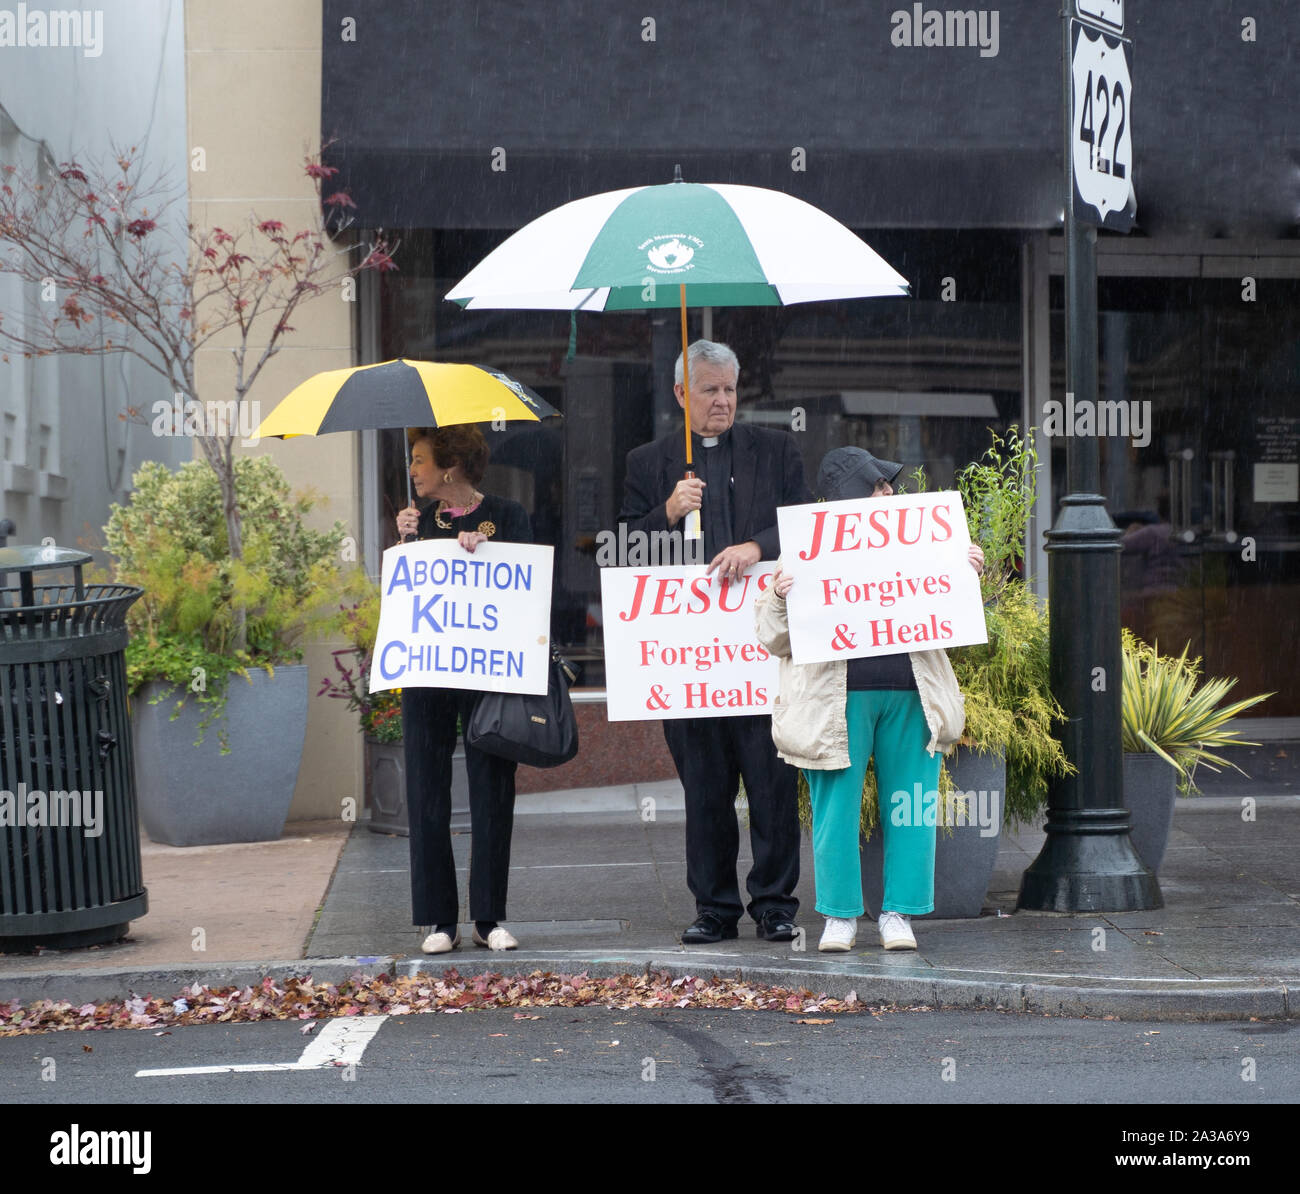 West Reading, Pennsylvania/USA – October 6, 2019: Life Chain Event: Heavy rain does not deter two senior women  and one man from participating in righ Stock Photo